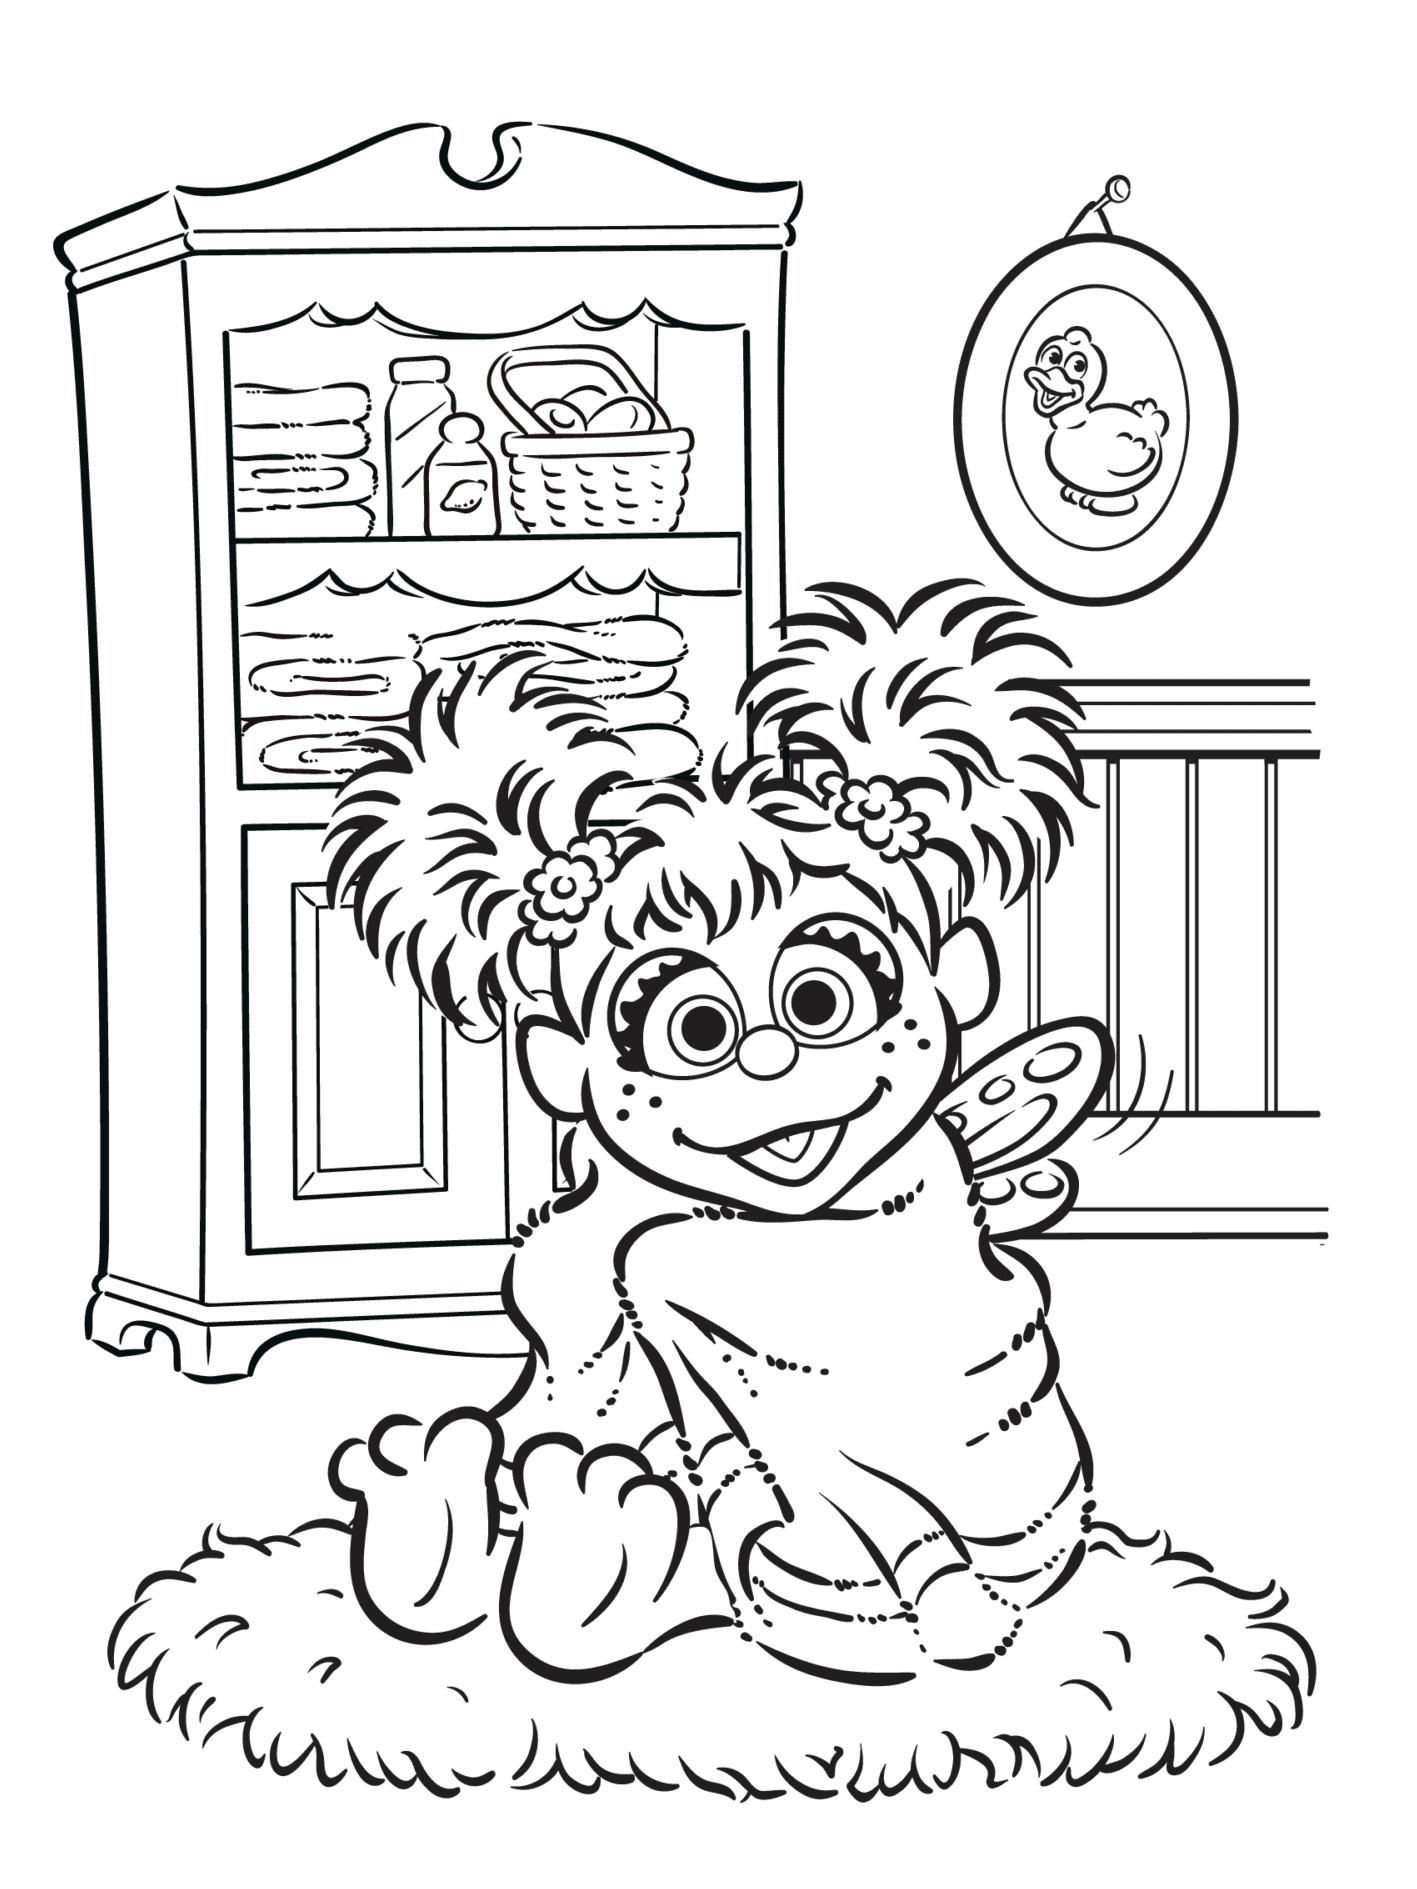 Abby Cadabby Coloring Pages Pdf to Print - Free Printables Abby Cadabby Coloring Pages